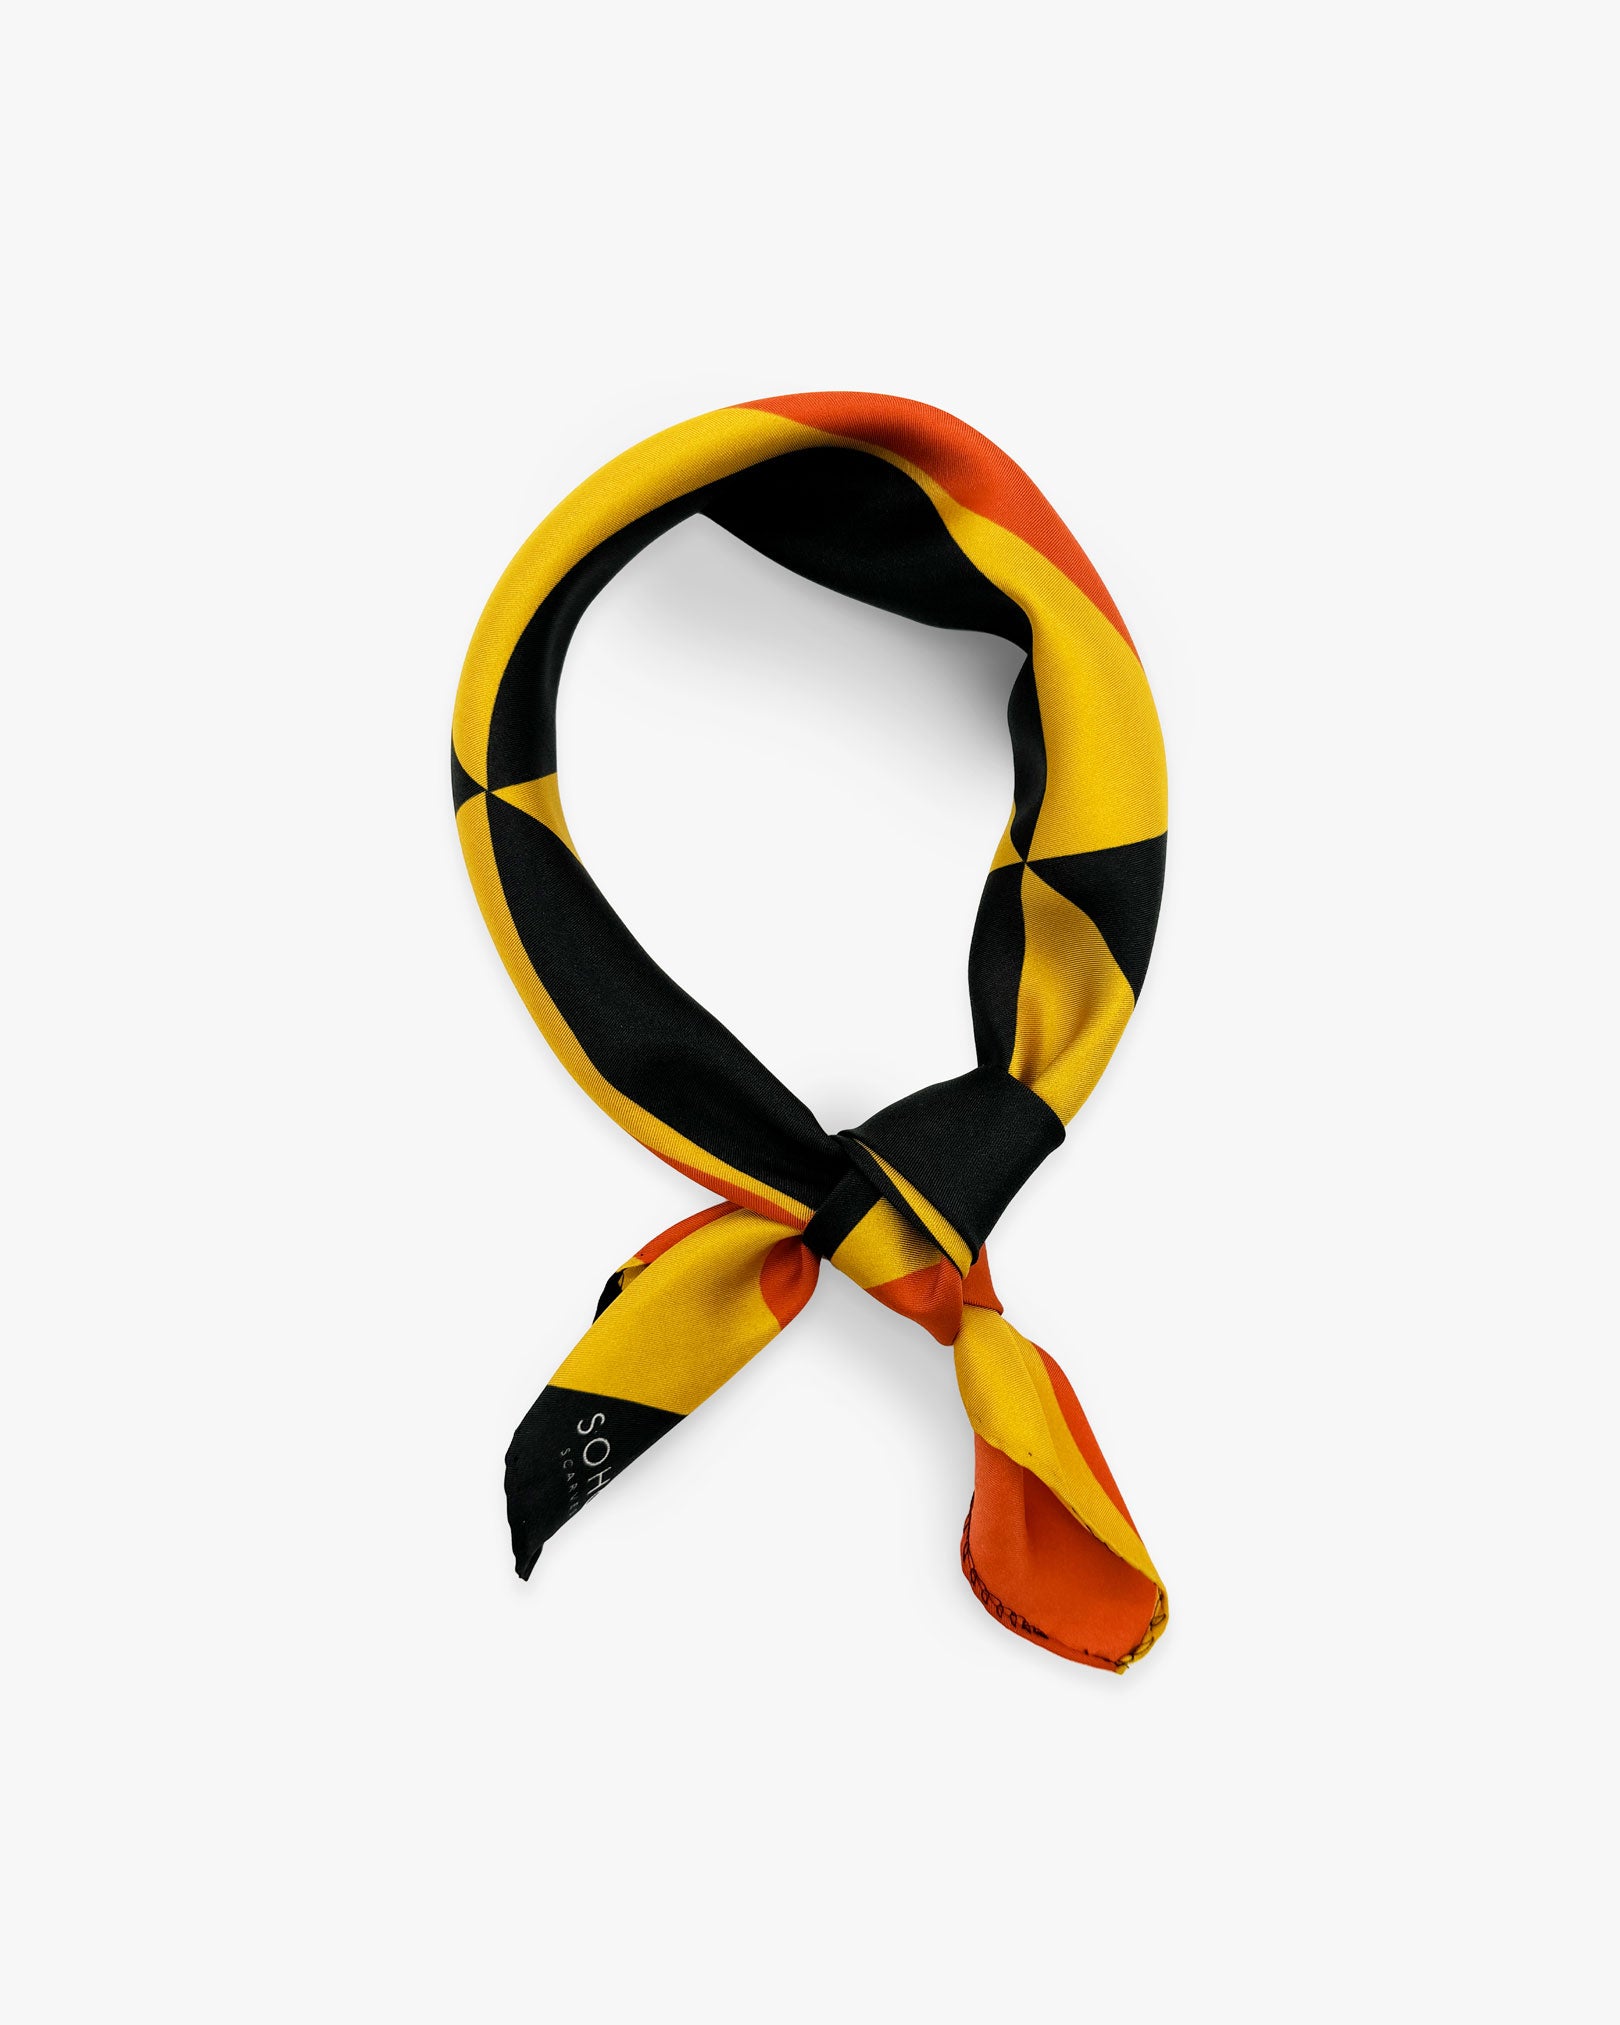 The 'Dresden' Bauhaus-inspired silk neckerchief knotted and looped against a white background.